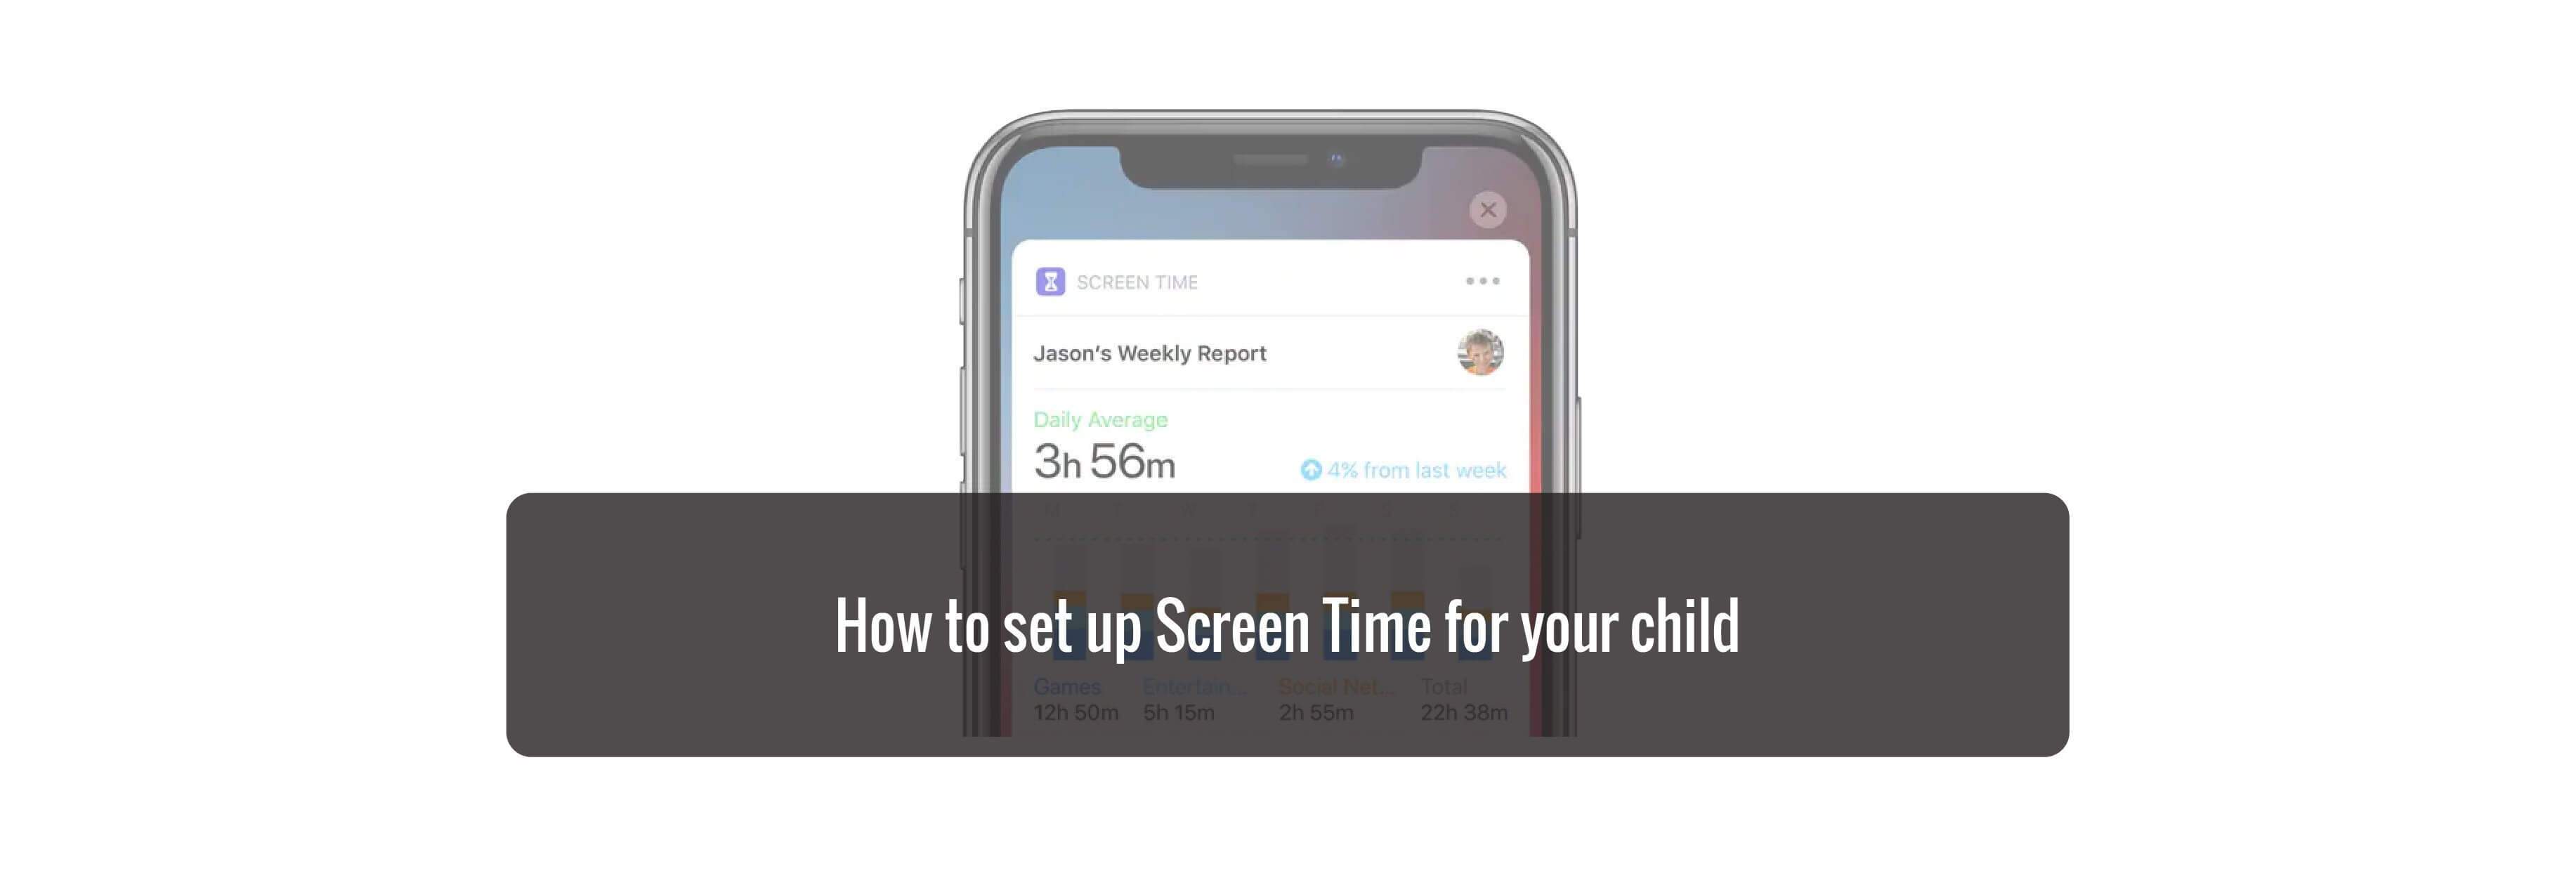 How to set up Screen Time for your child